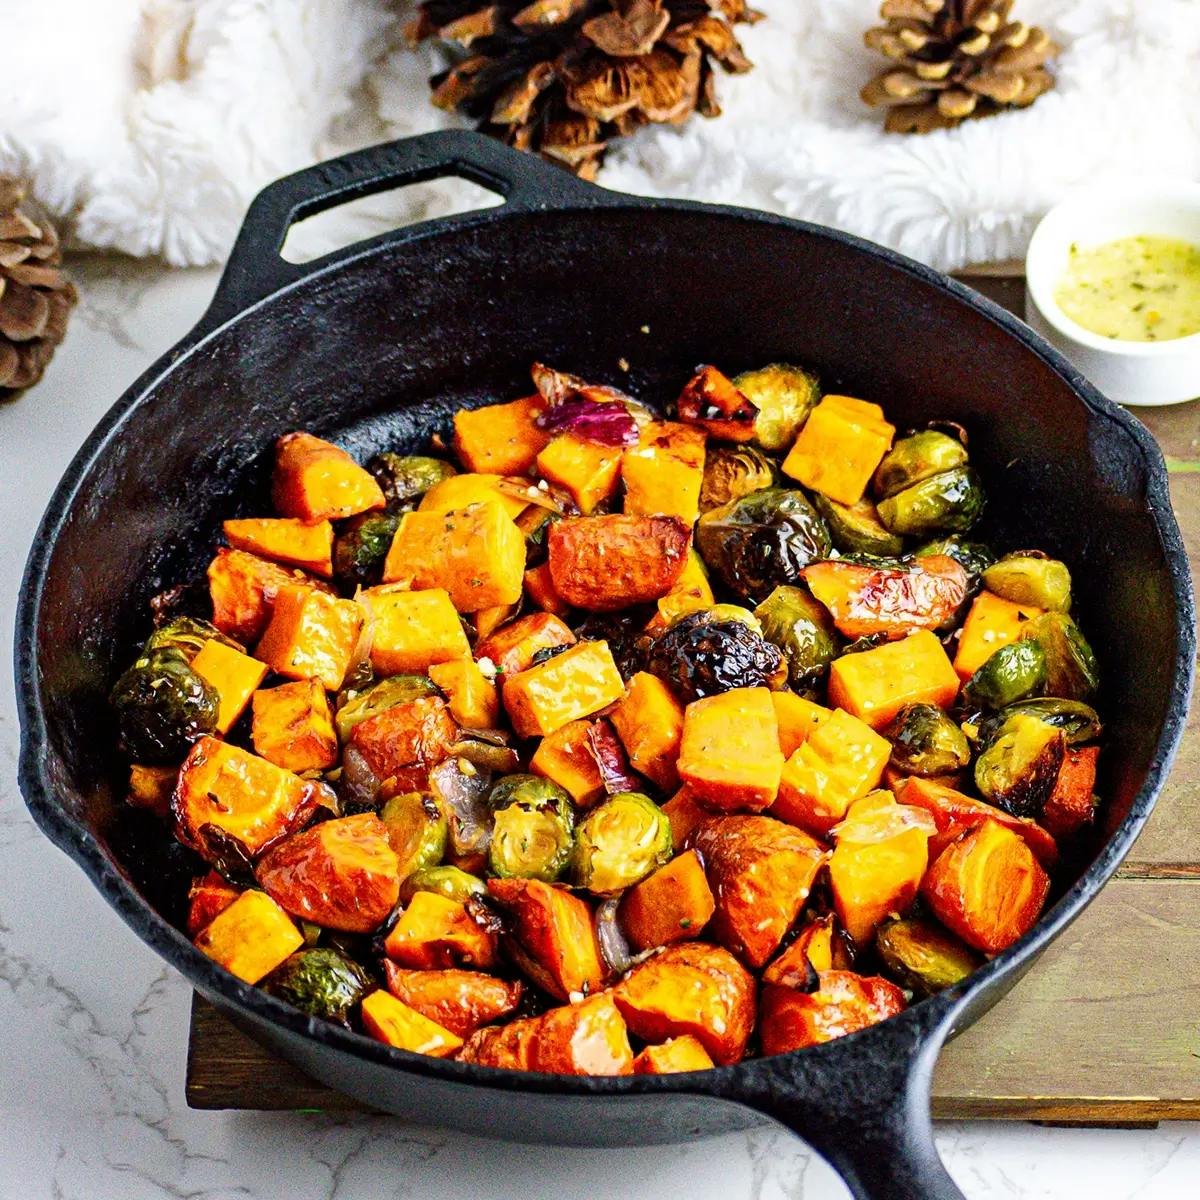 Oven roasted vegetables in a skillet, a Thanksgiving or Christmas side dish.